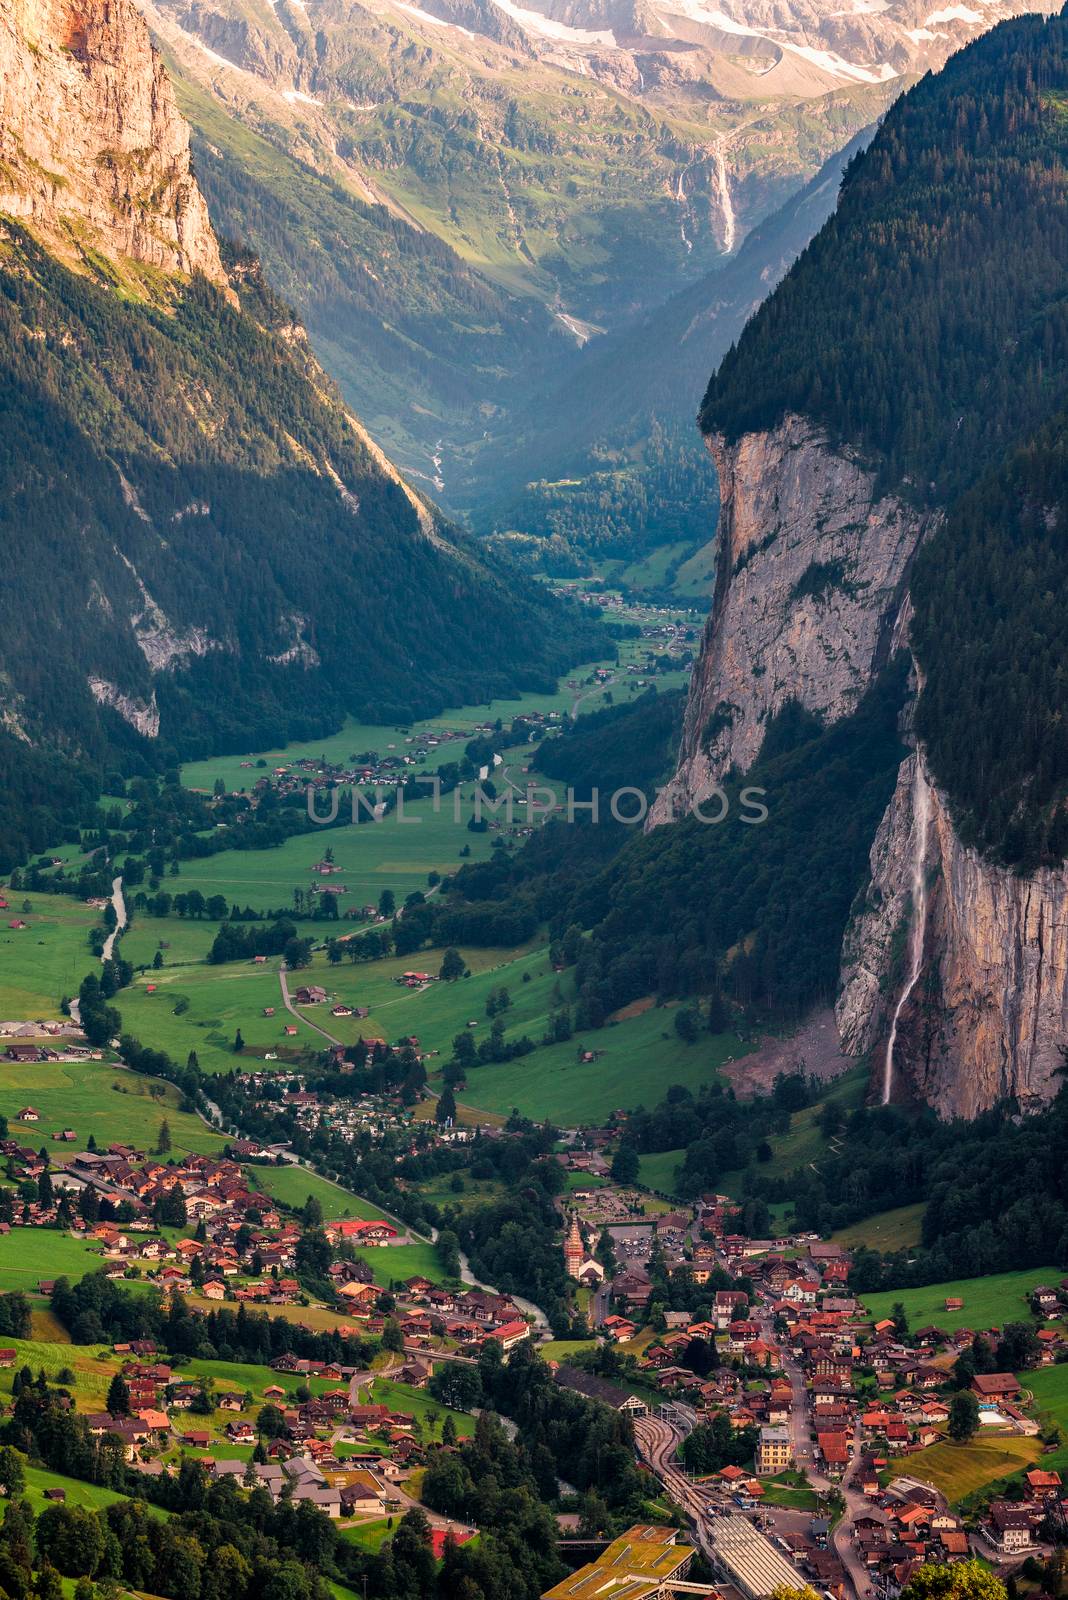 Lauterbrunnen valley located in the Swiss Alps near Interlaken in the Bernese Oberland of Switzerland, also known as the Valley of waterfalls. Cold evening.